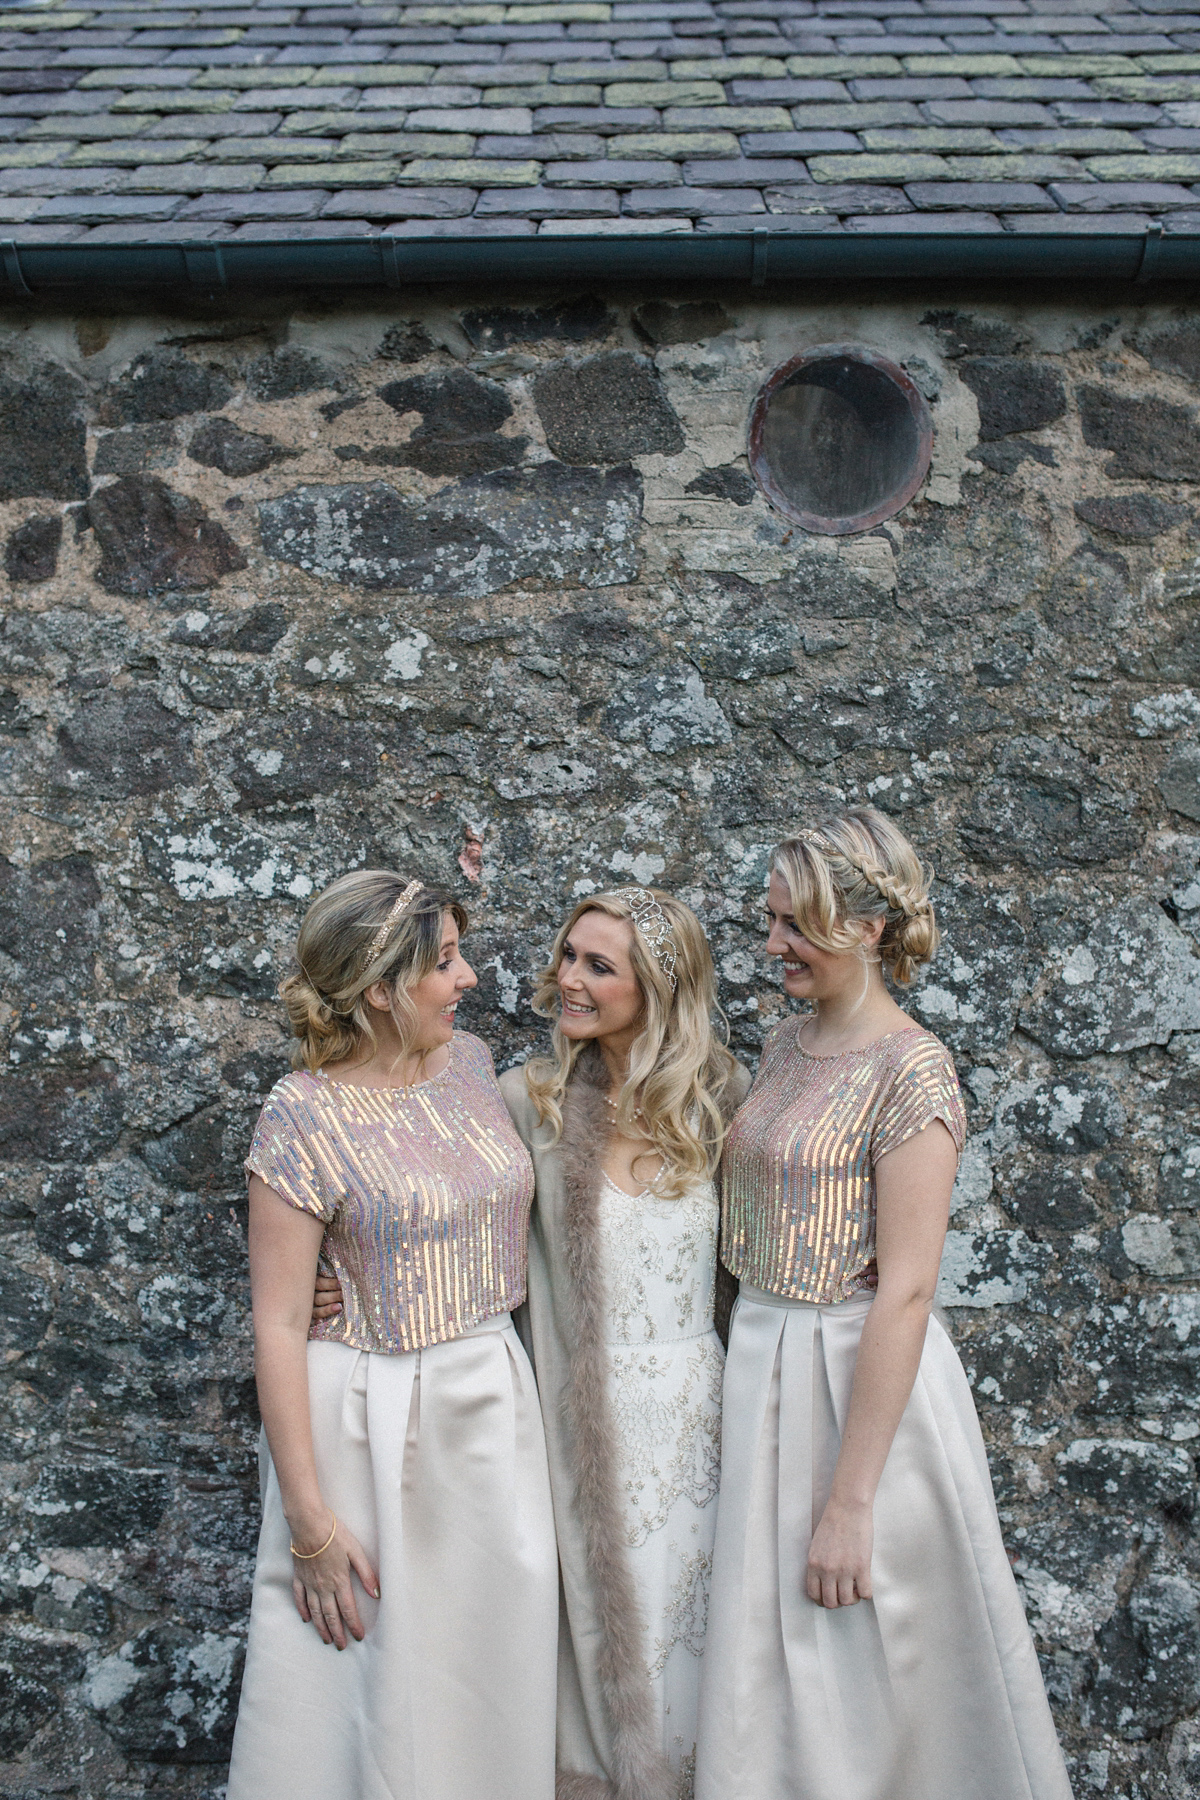 Julia wore the Leila gown by Jenny Packham for her rustic, Autumn wedding at The Byre at Inchyra. Photography by Jen Owens.